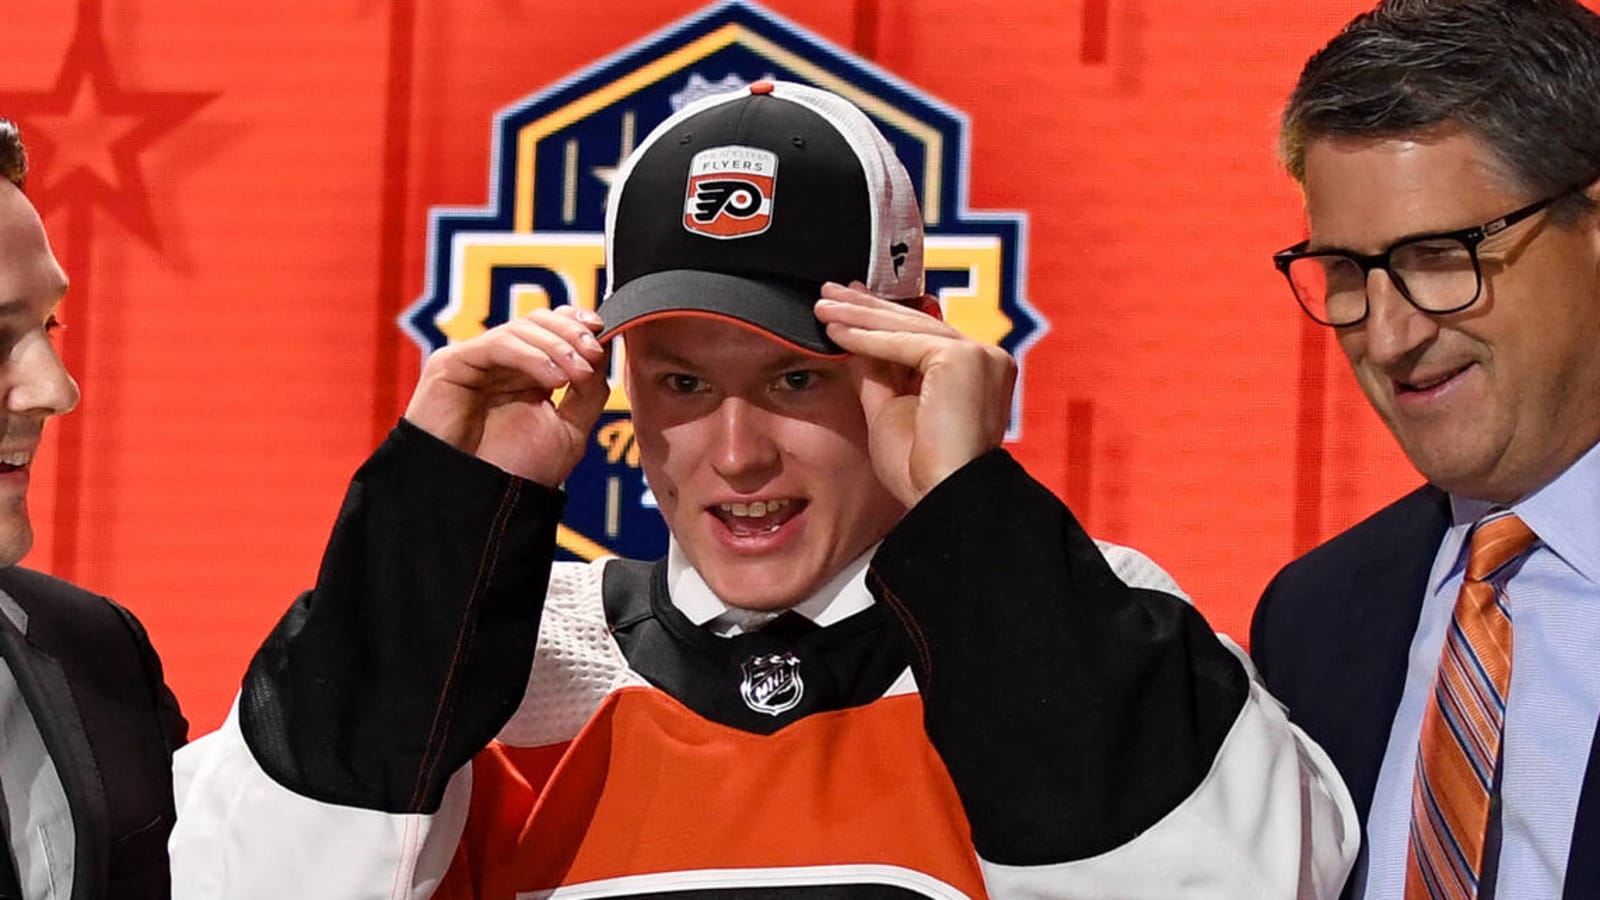 Report: 2023 No. 7 pick expected to terminate KHL contract, join Flyers